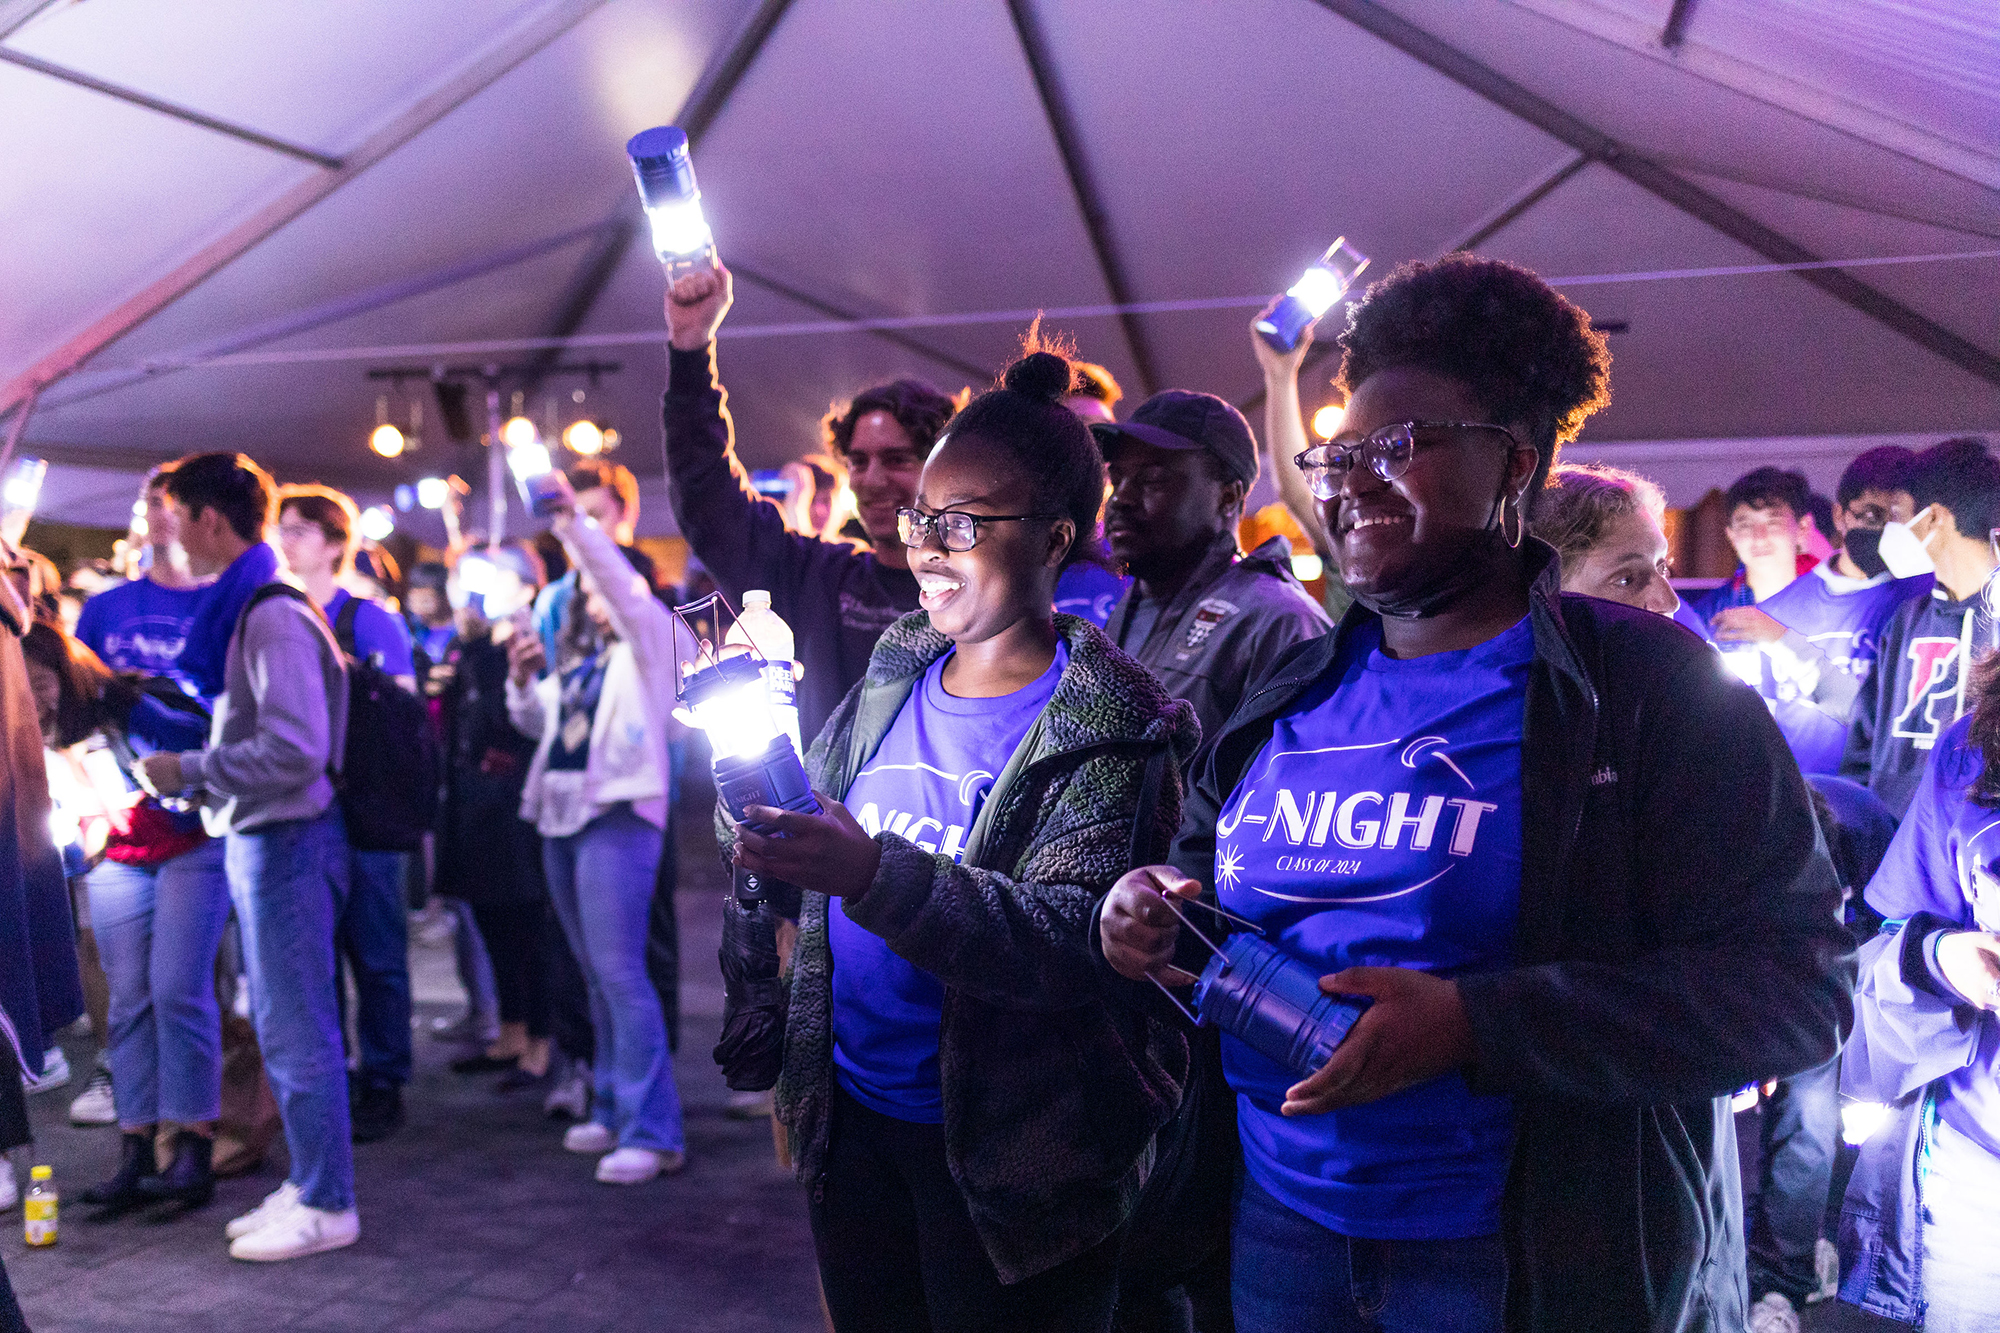 A group of Penn undergrads wearing U-Night shirts hold lanterns under a large party tent.